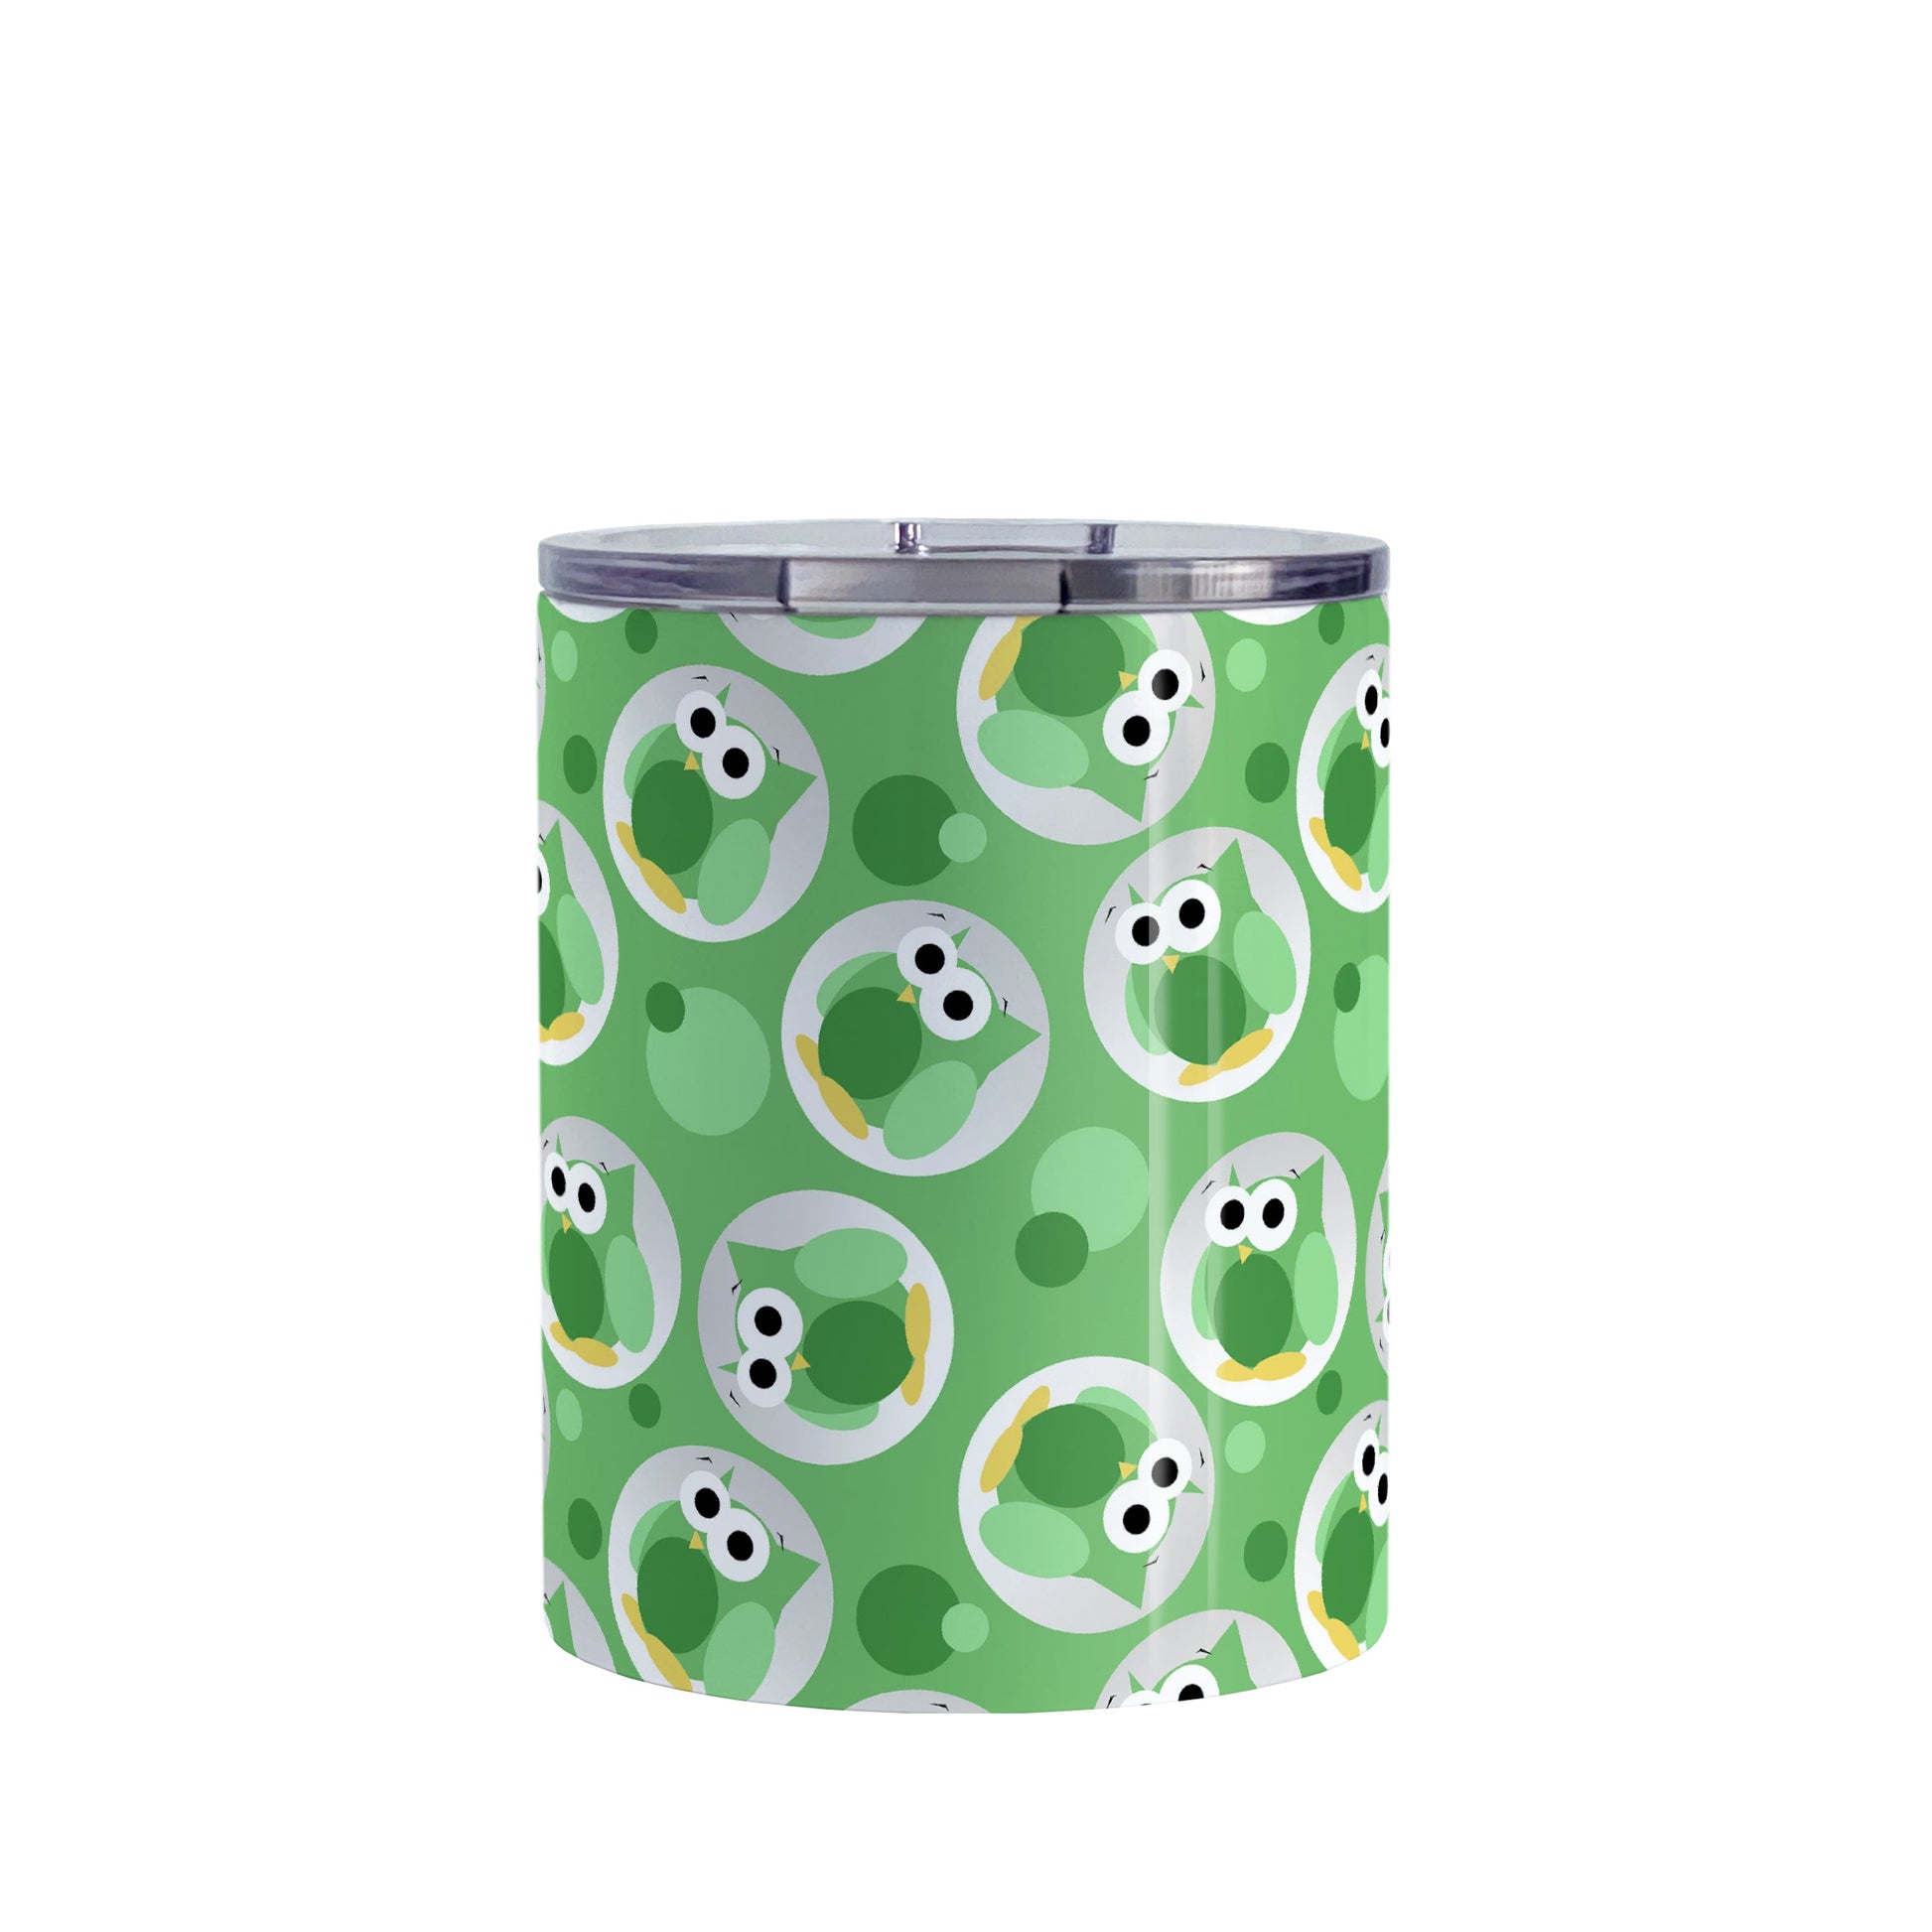 Funny Cute Green Owl Pattern Tumbler Cup (10oz, stainless steel insulated) at Amy's Coffee Mugs